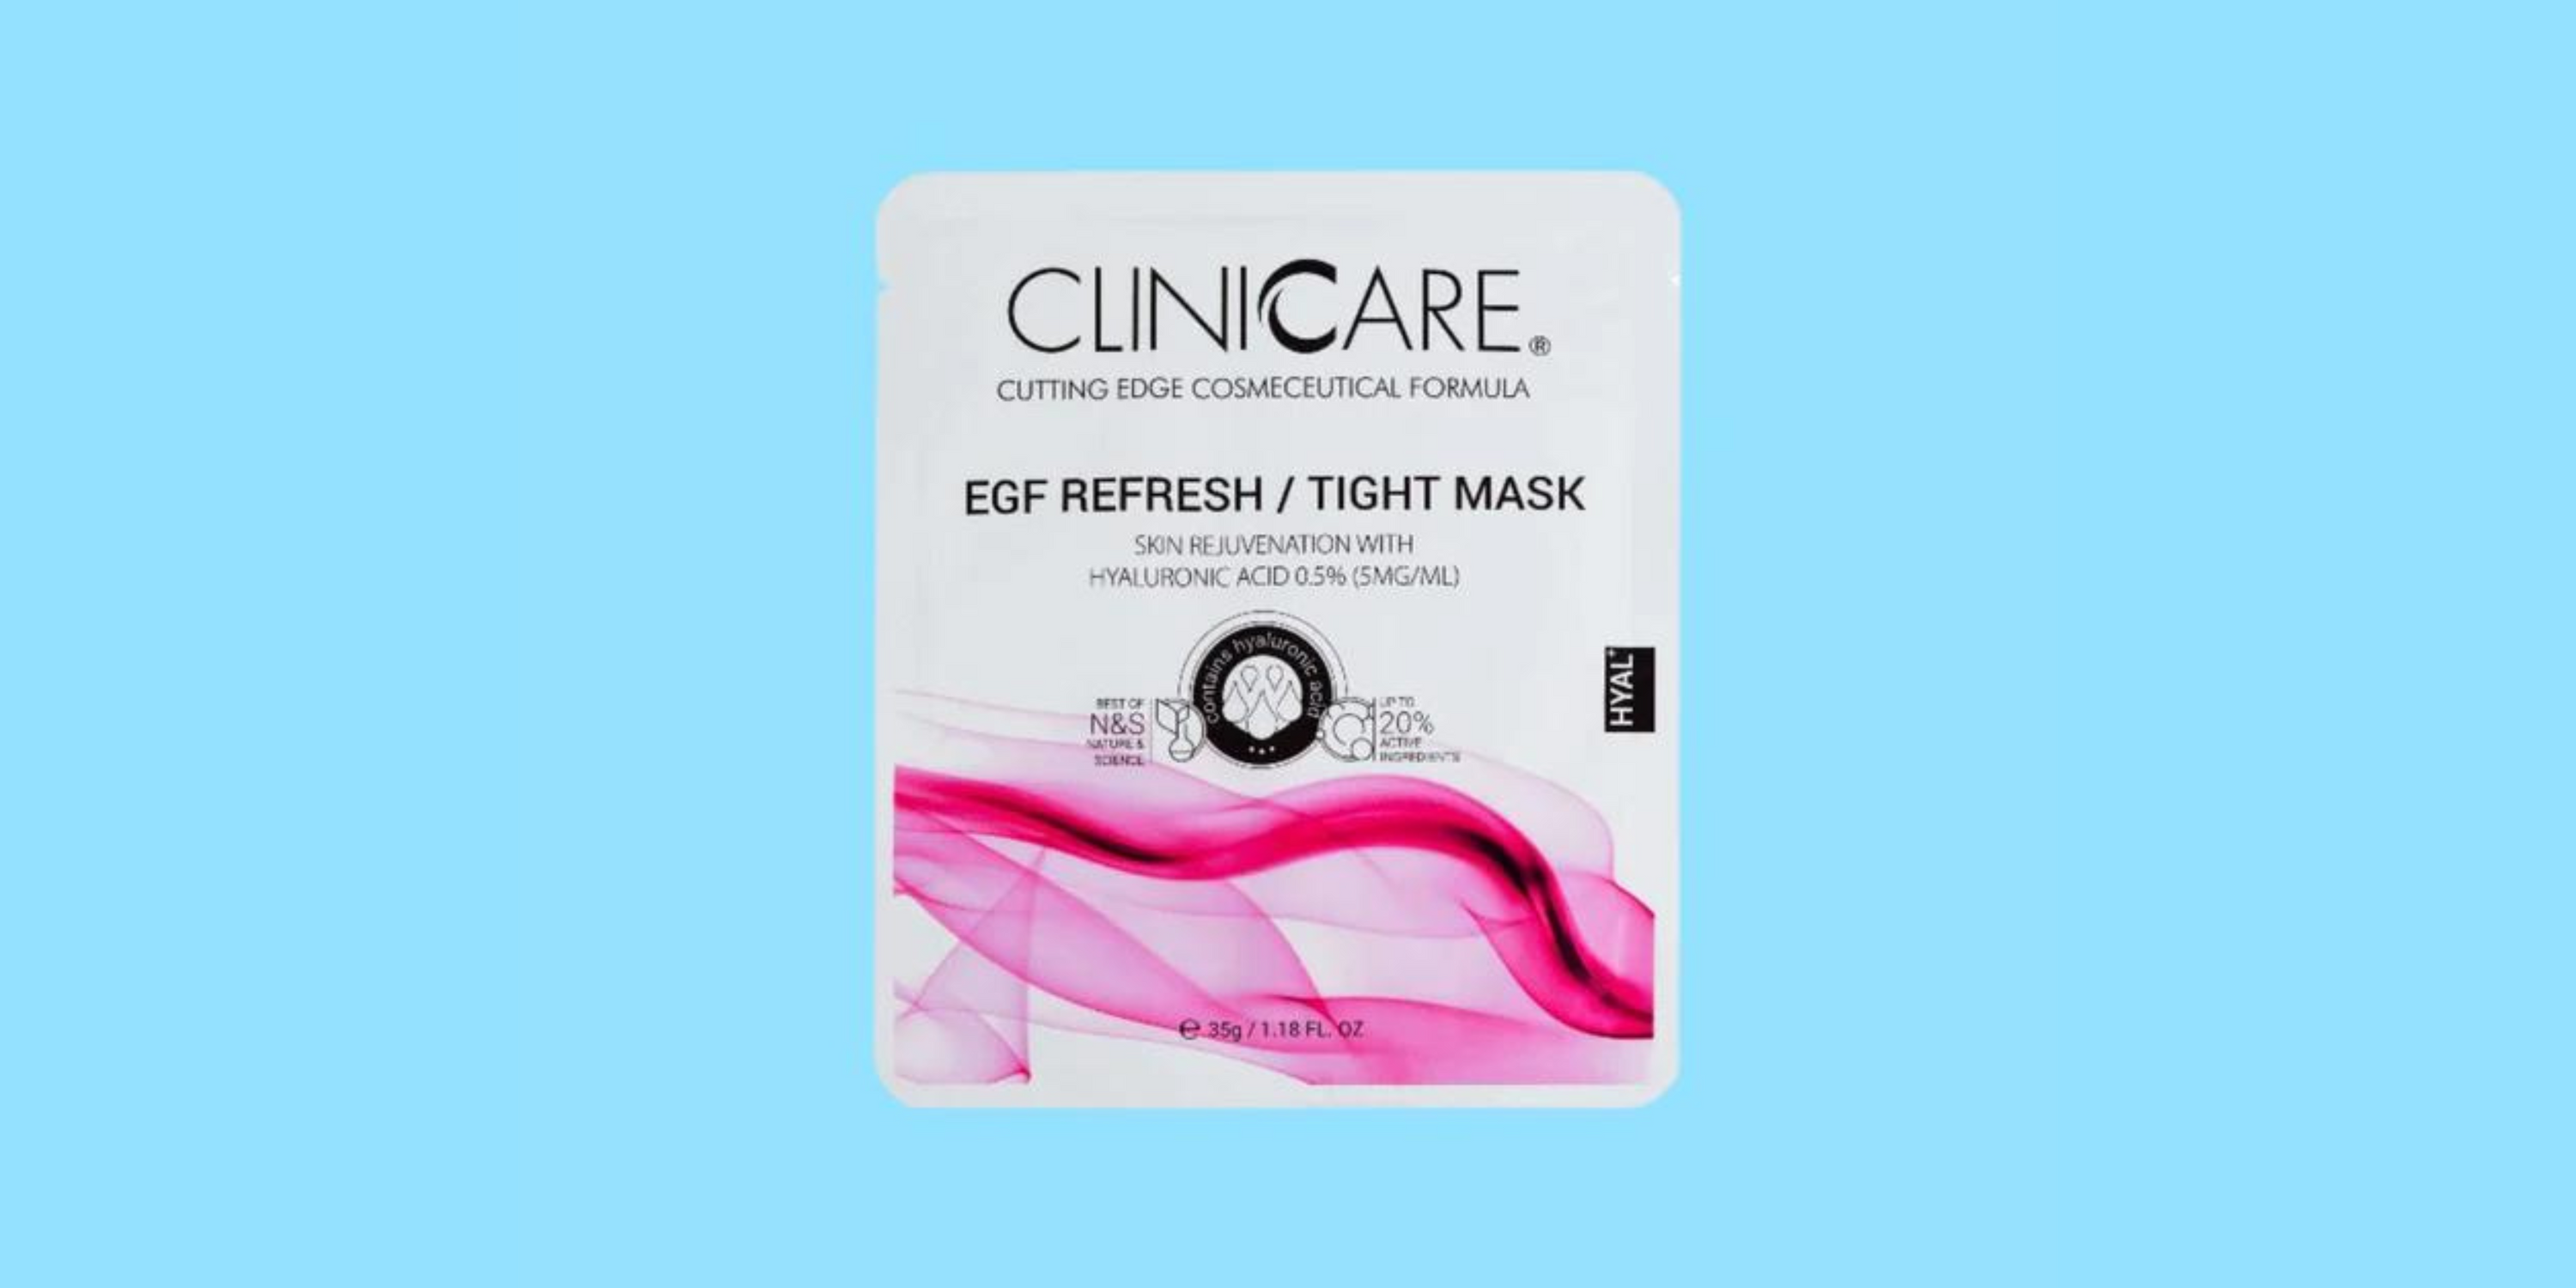 The Pros and Cons of the CLINICCARE EGF Refresh/Tight Mask - 1 Mask 35g